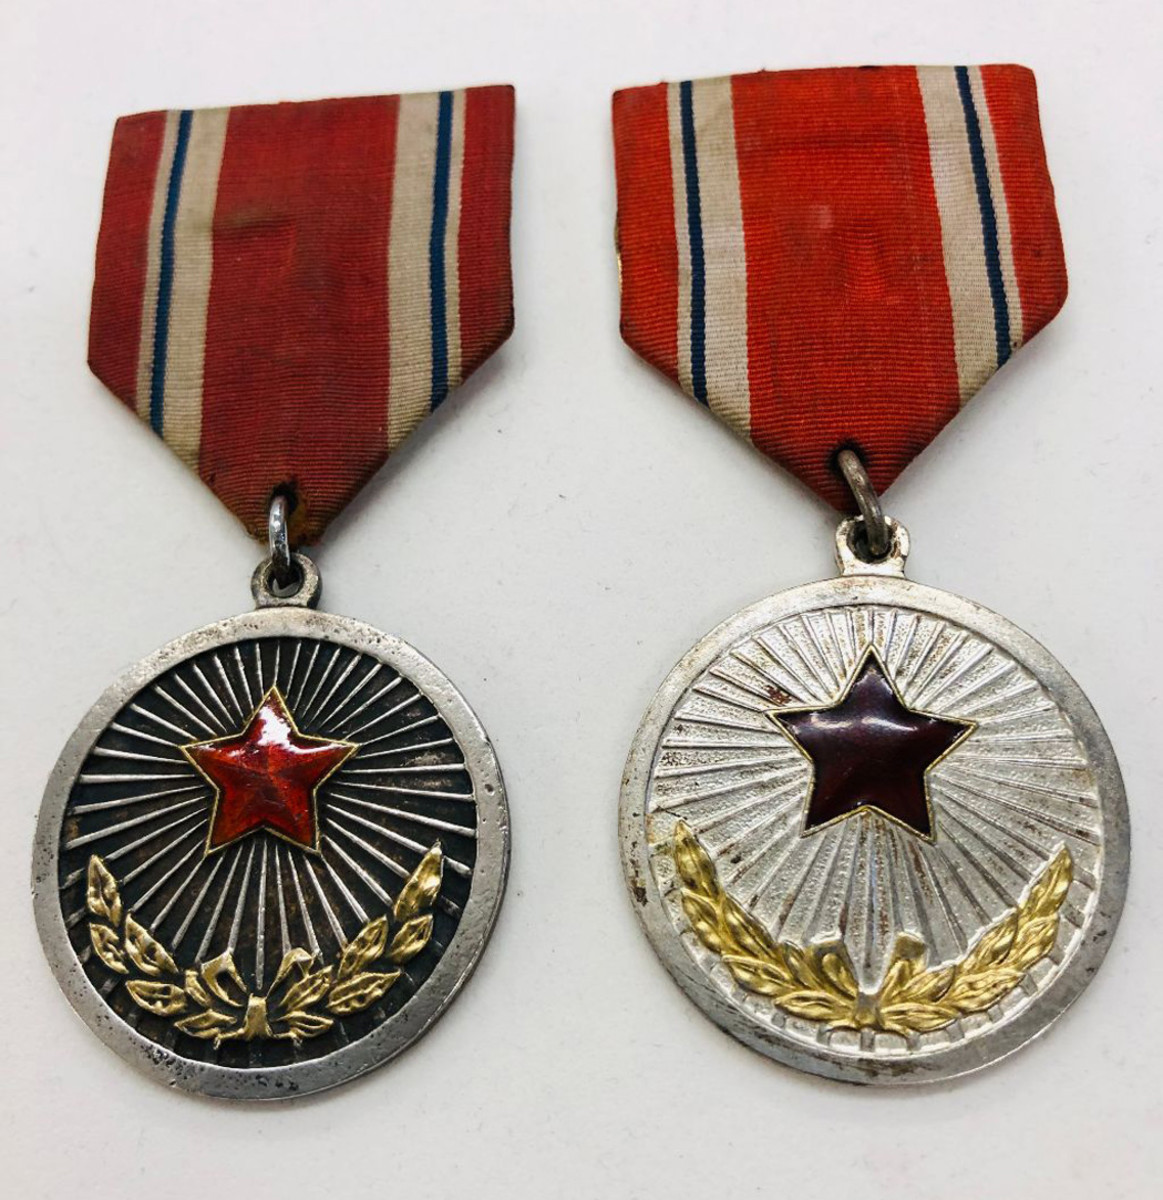 There is a distinct difference in the early issue and the later issue of the Meritorious (Labor) medal. The reverse of both have the name of the medal in Korean characters.